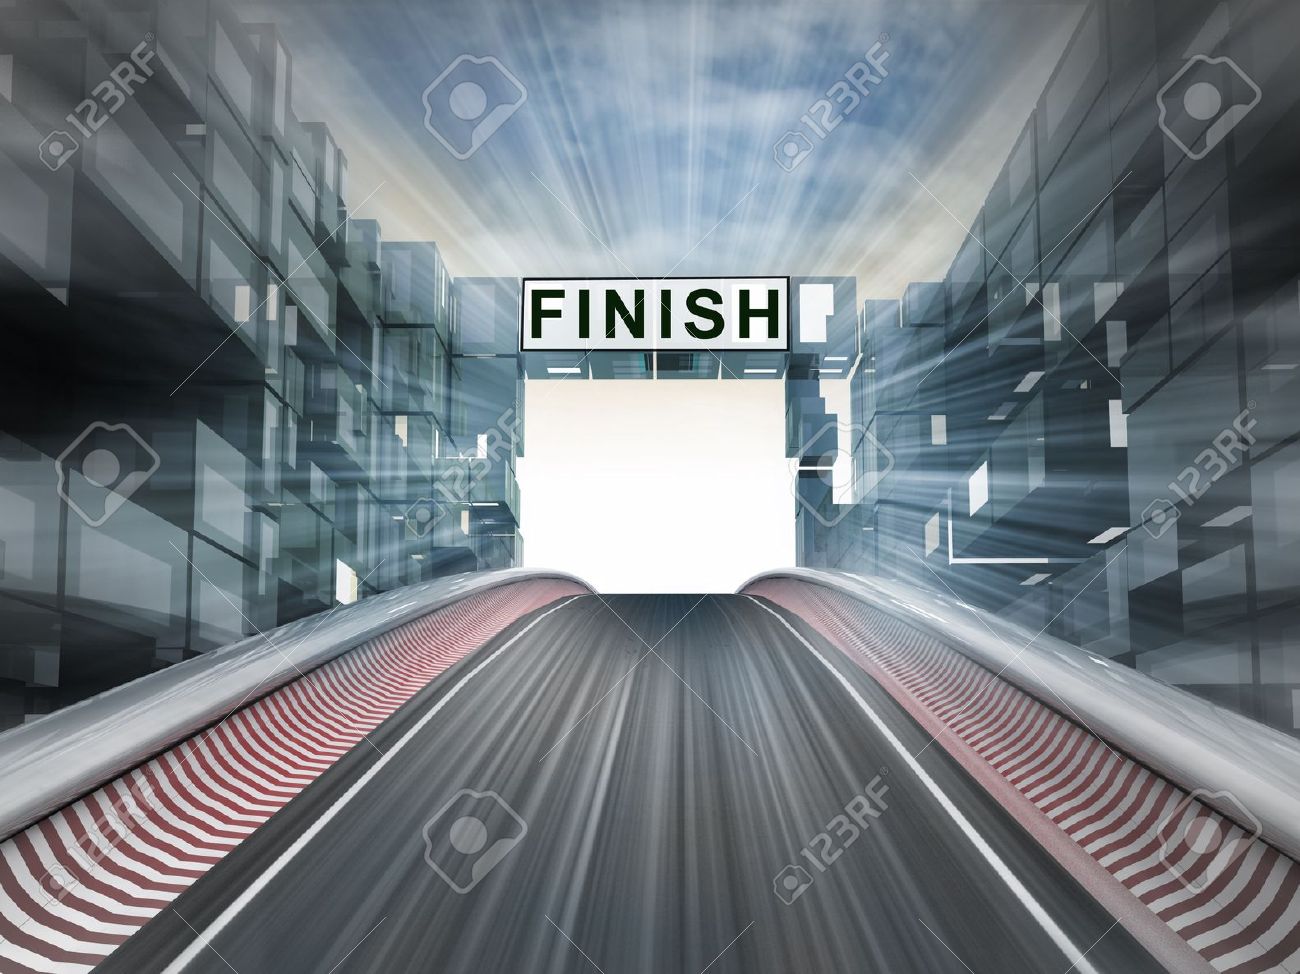 Race Petition Finish Line In City Background Illustration Stock